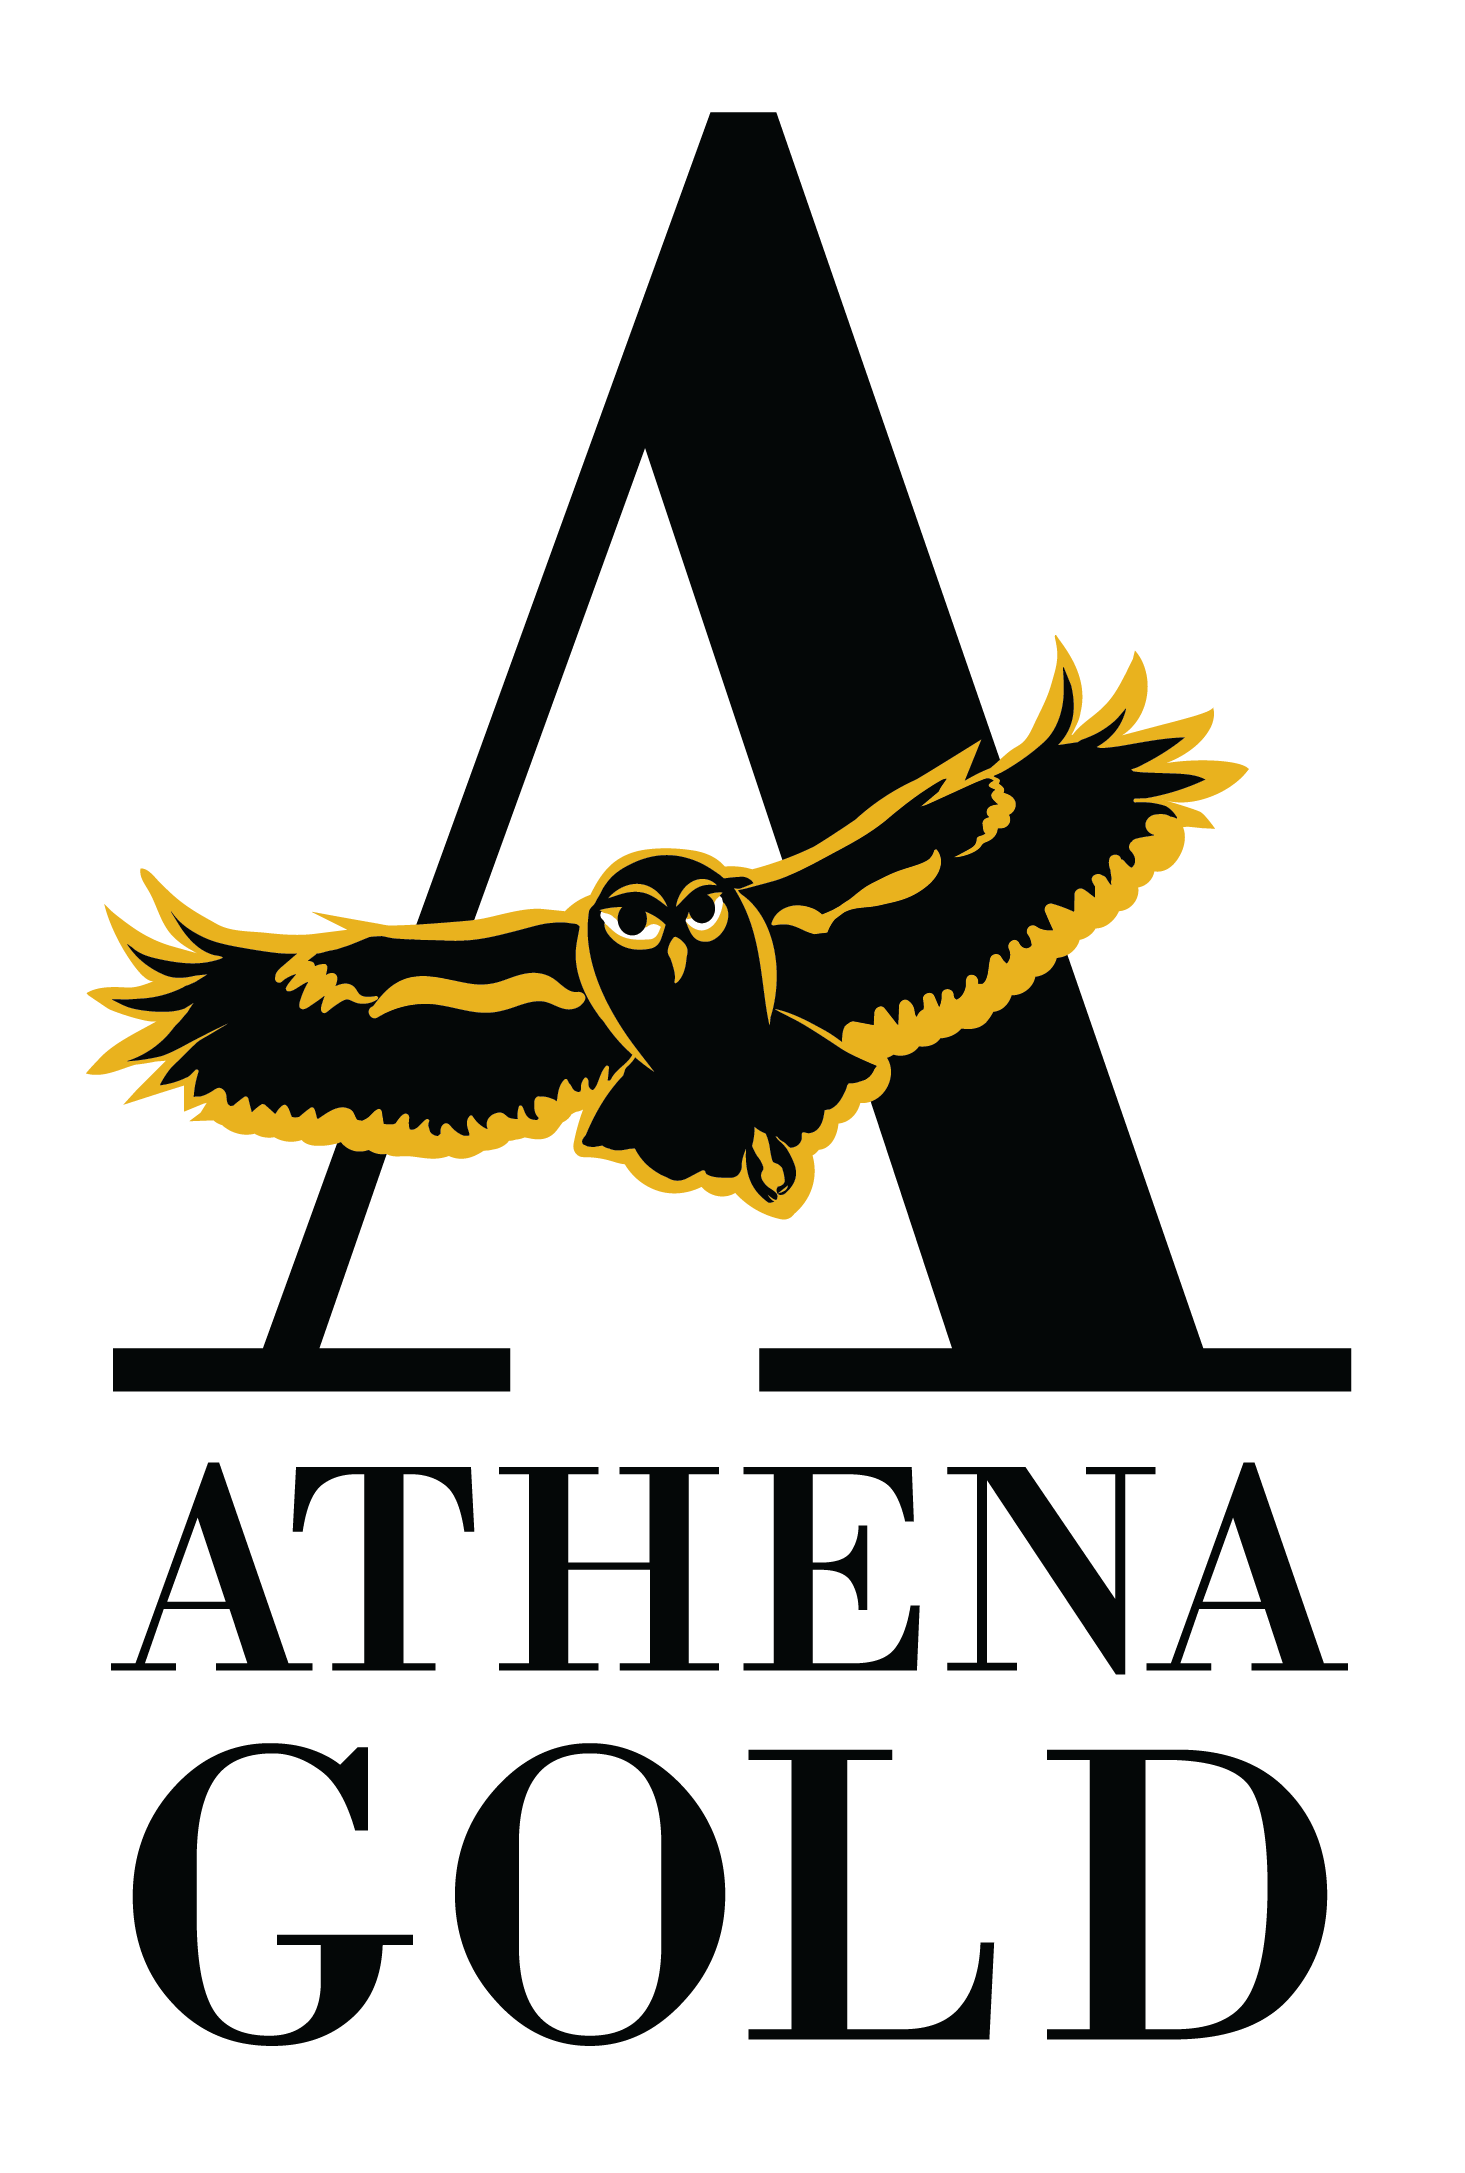 Athena Gold Corporation, Wednesday, February 9, 2022, Press release picture